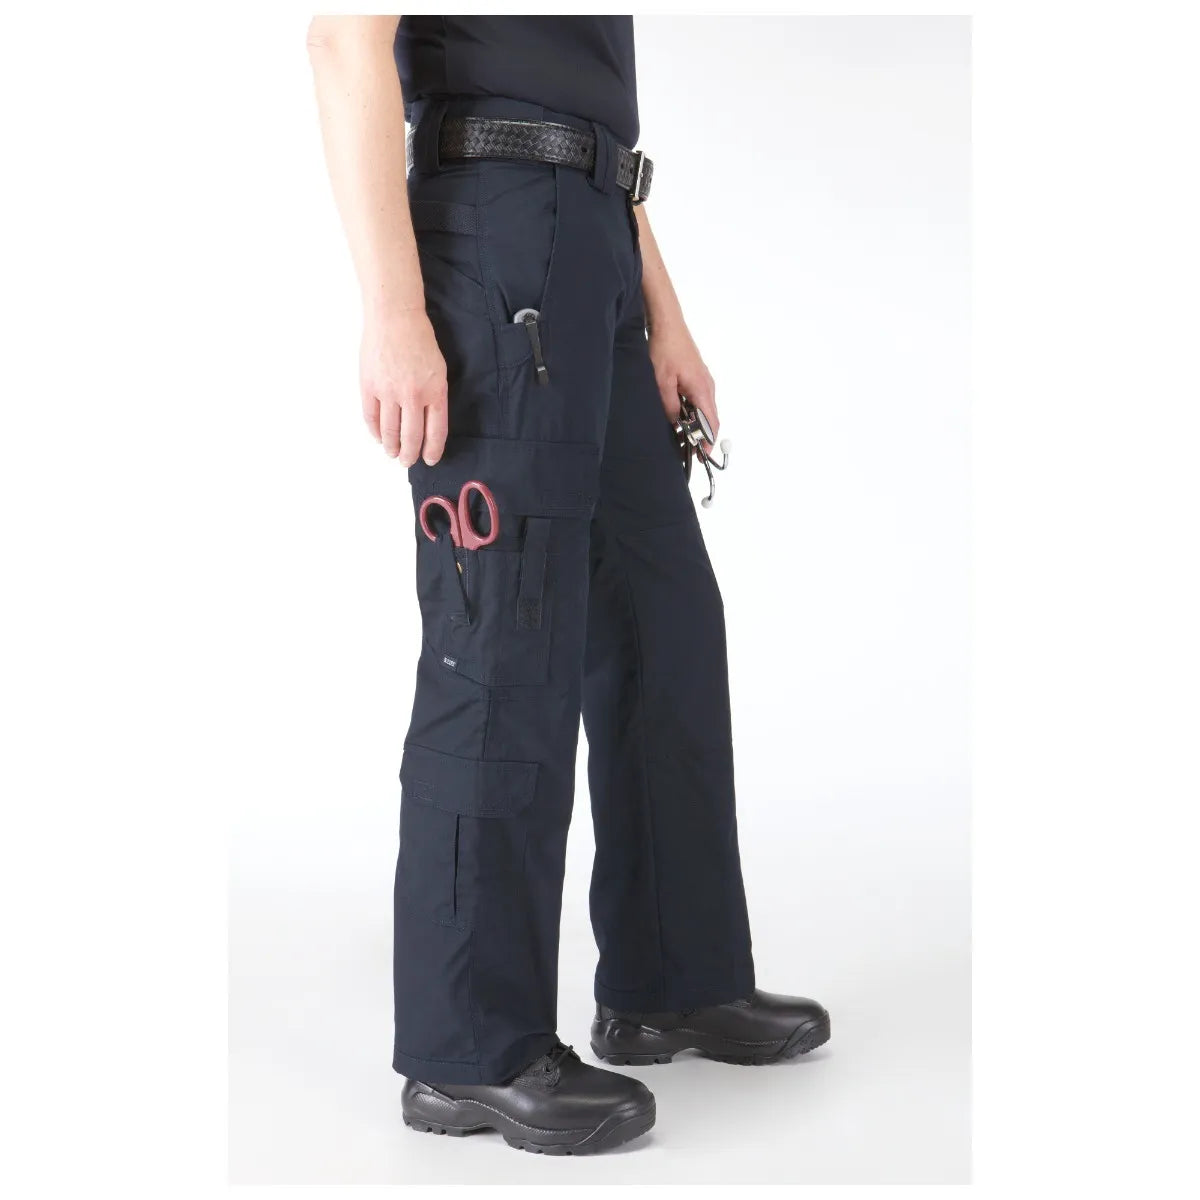 5.11 Tactical Women's TACLITE EMS Pants 64369 - Clothing & Accessories